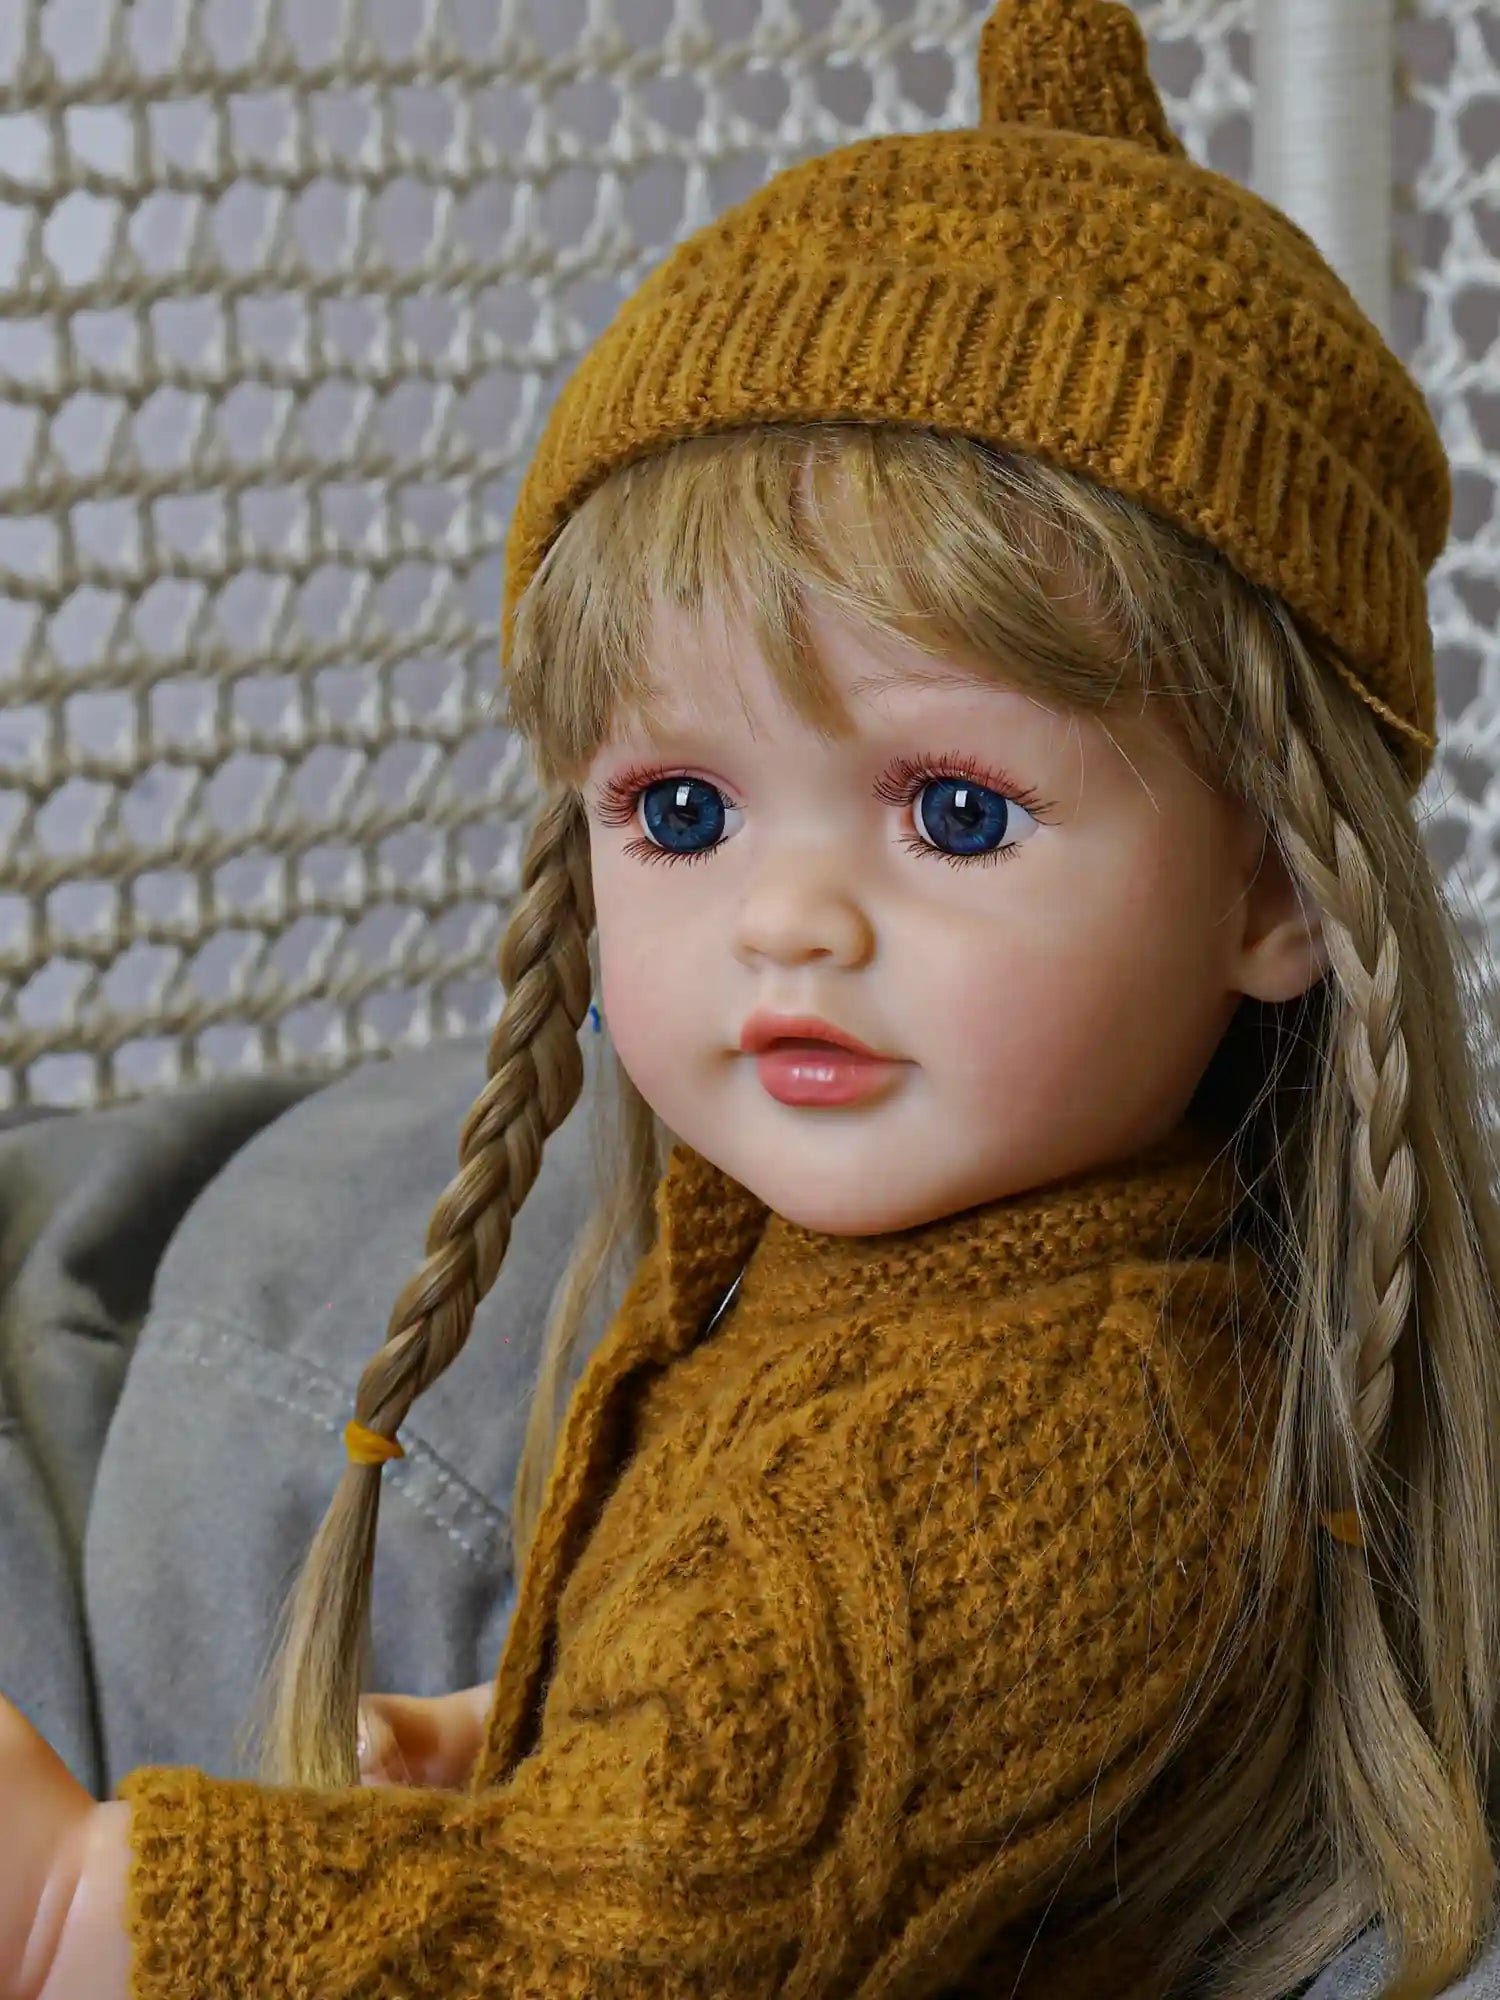 Doll designed to resemble a thoughtful child, with delicate facial features, a braid, and deep blue eyes, dressed warmly in a knitted mustard ensemble.